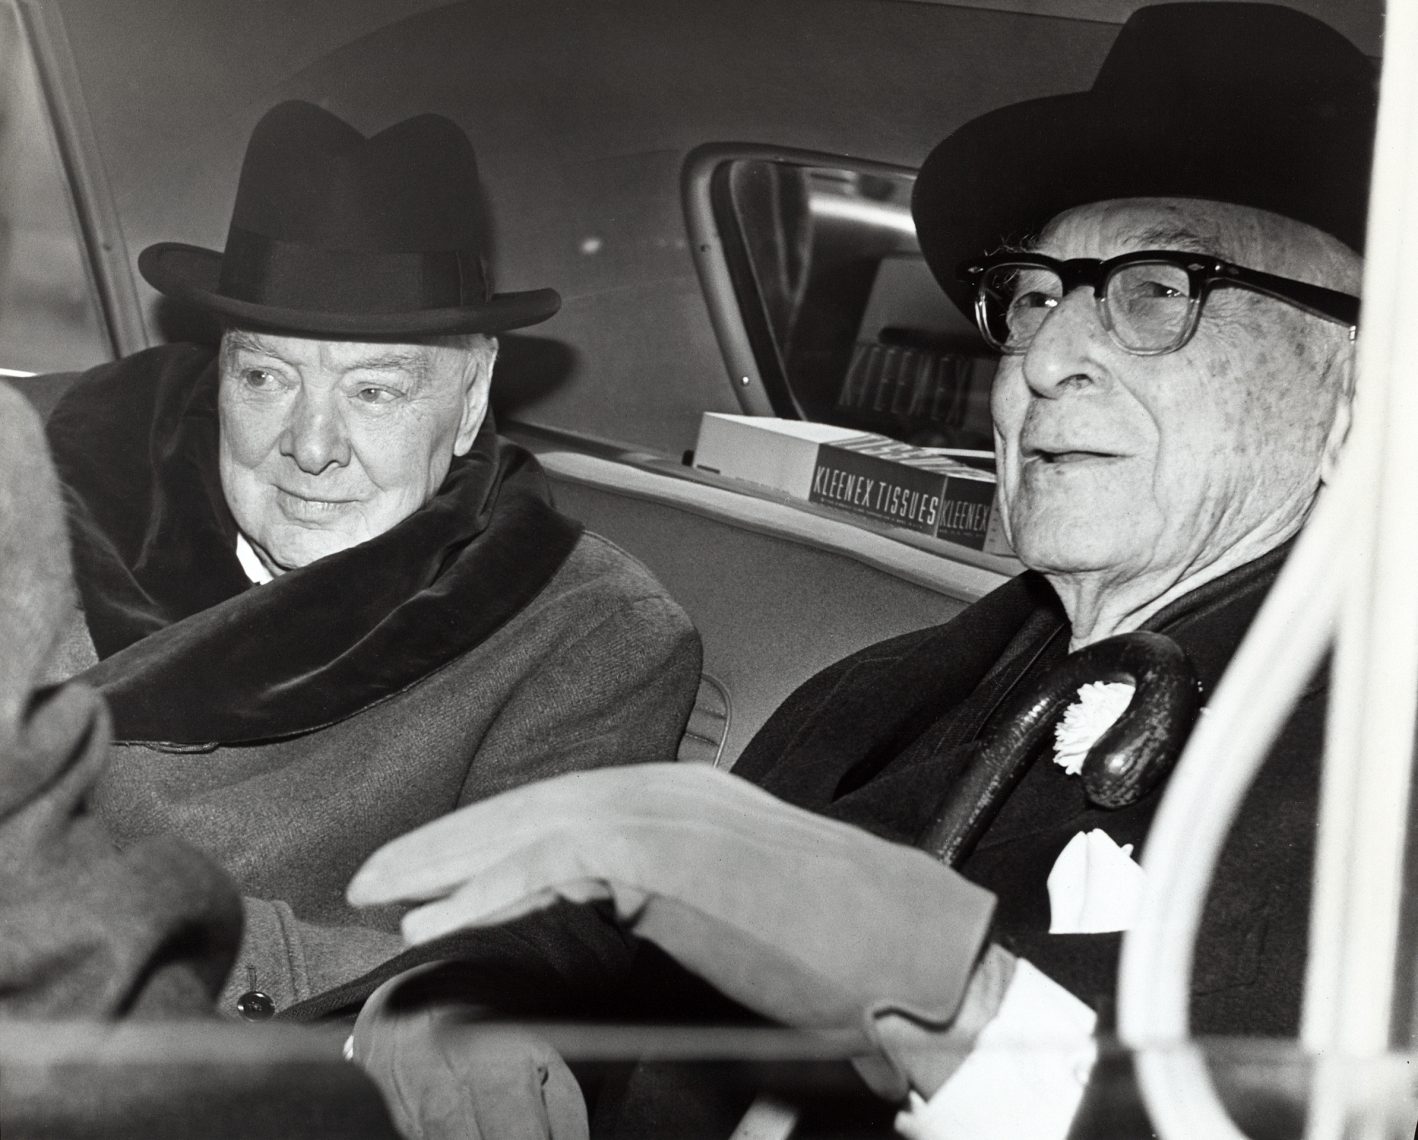 Winston_Churchill_and_Bernard_Baruch_talk_in_car_in_front_of_Baruch's_home,_14_April_1961